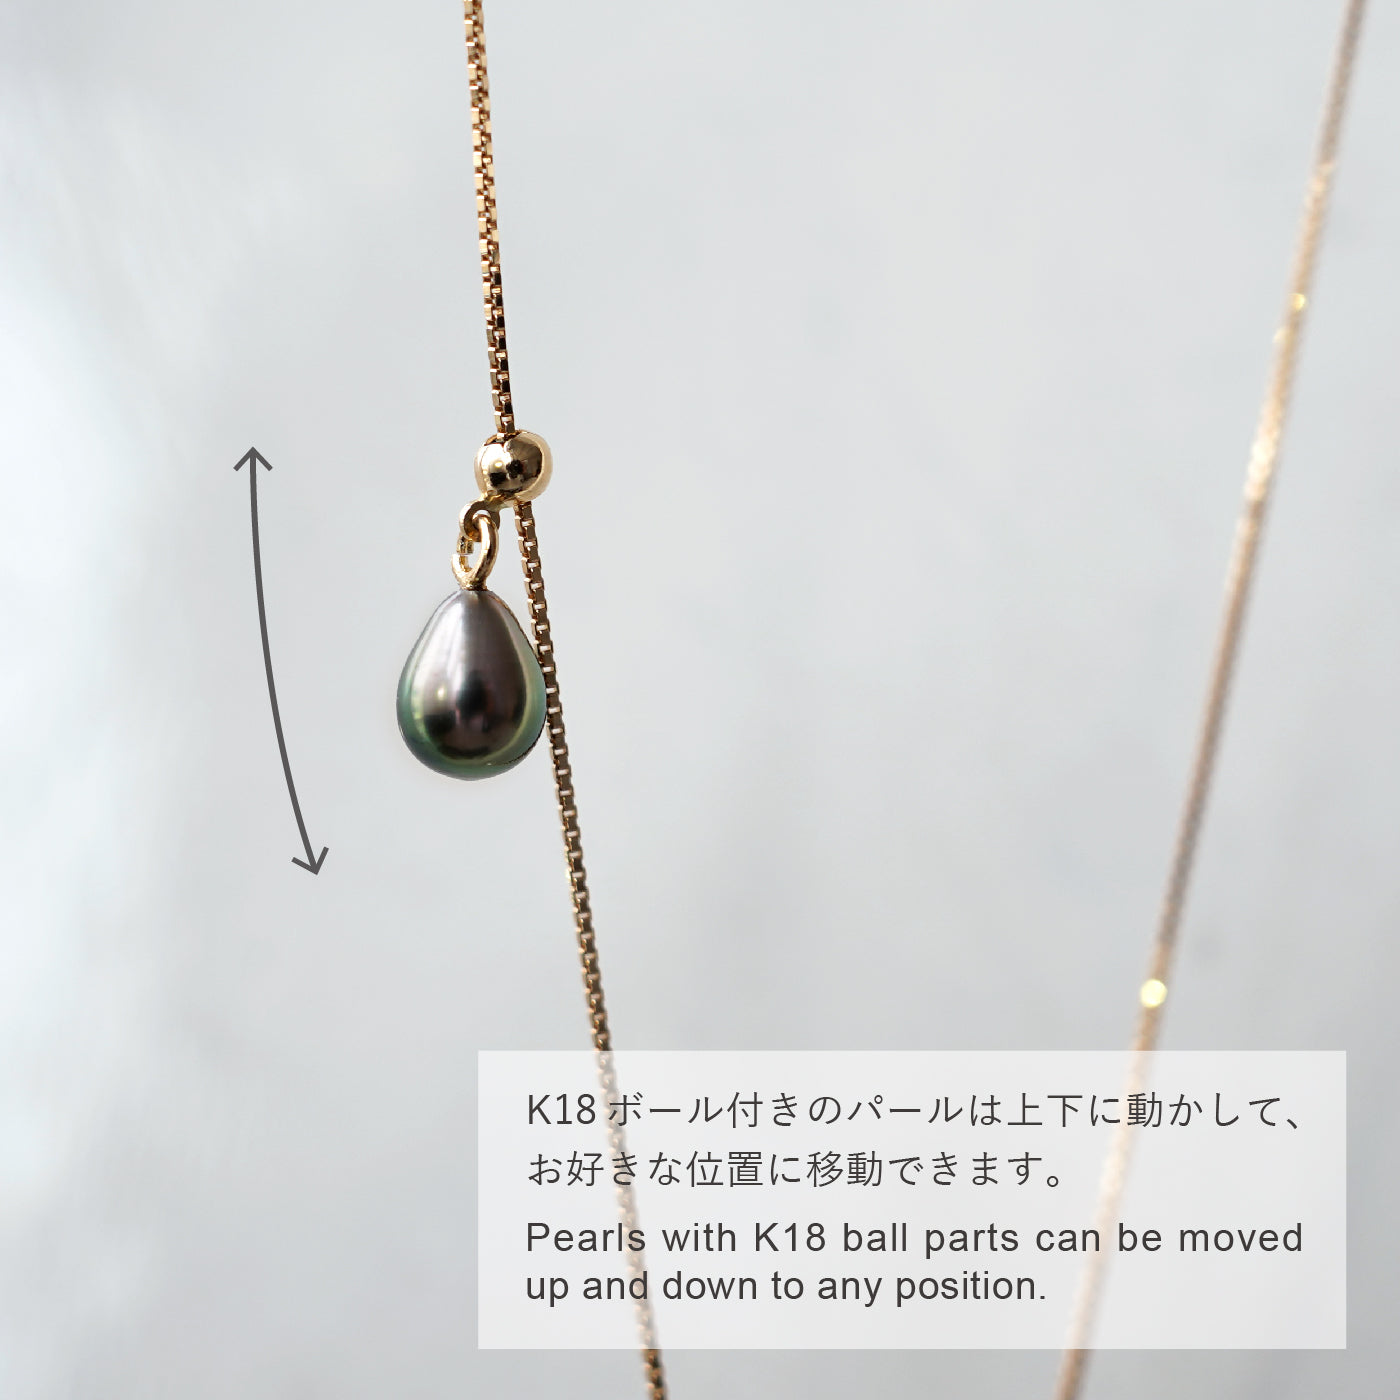 Wandering Pearl Chain Necklace - アコヤ & 黒蝶ケシ